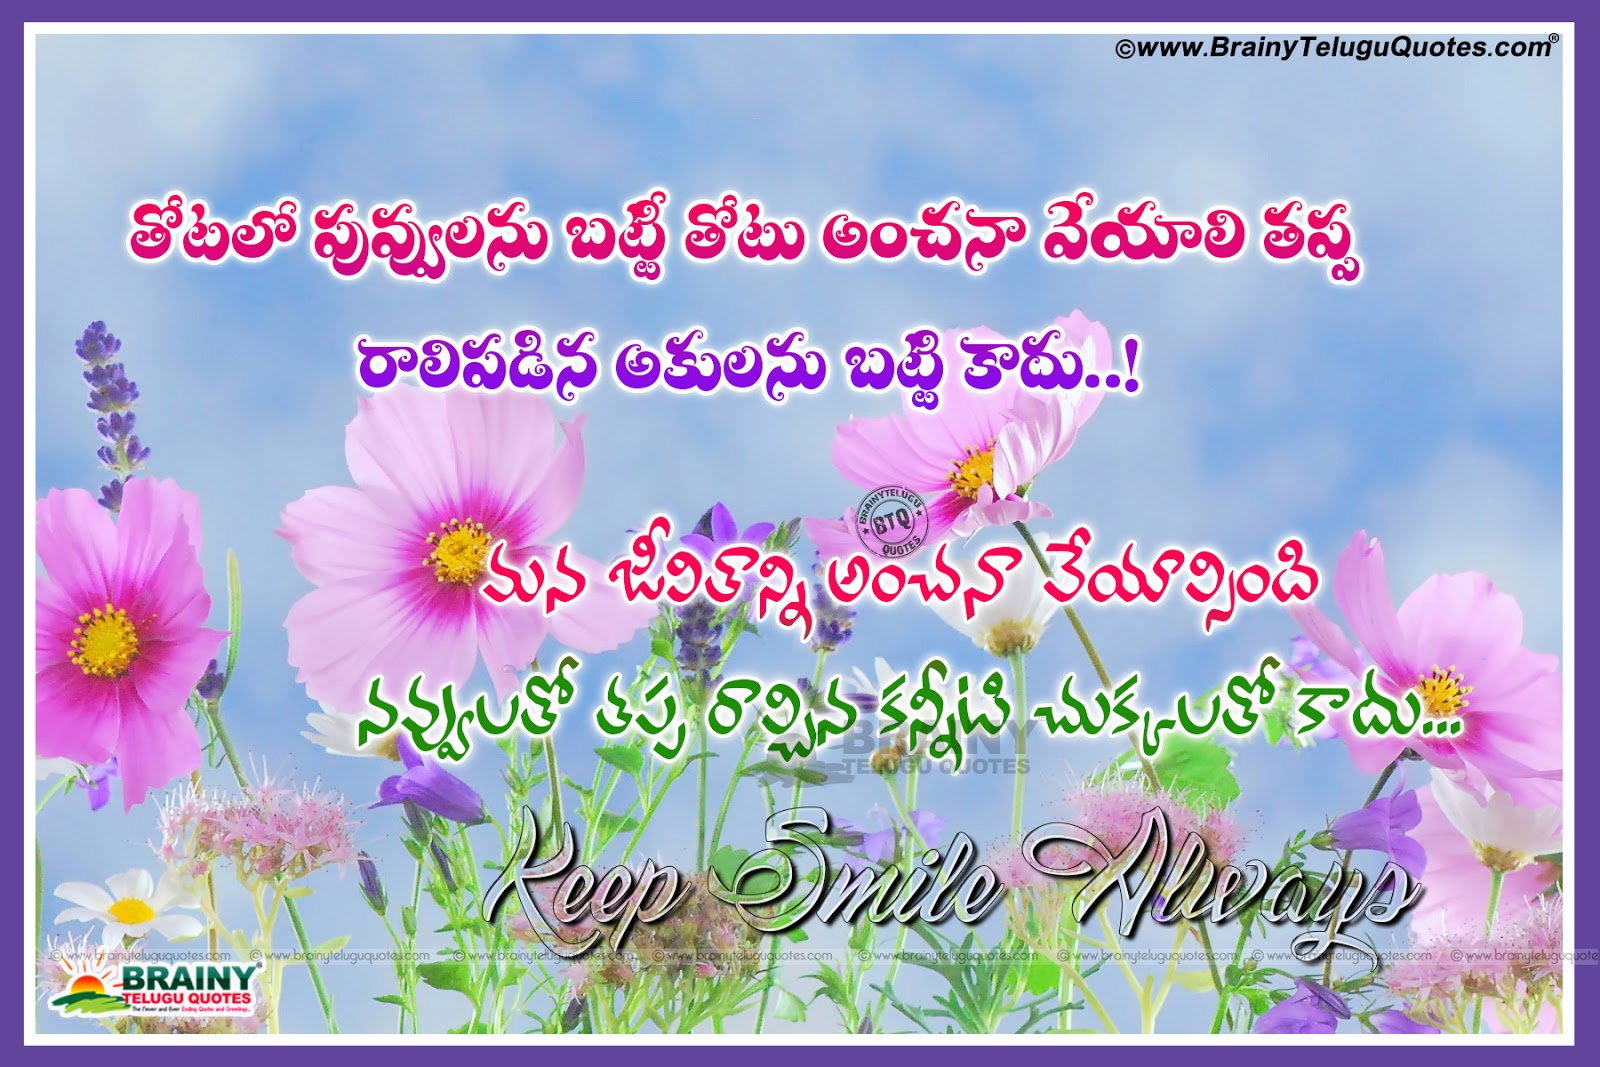  Telugu  Famous Life Inspirational  Quotes  with Hd Wallpapers 